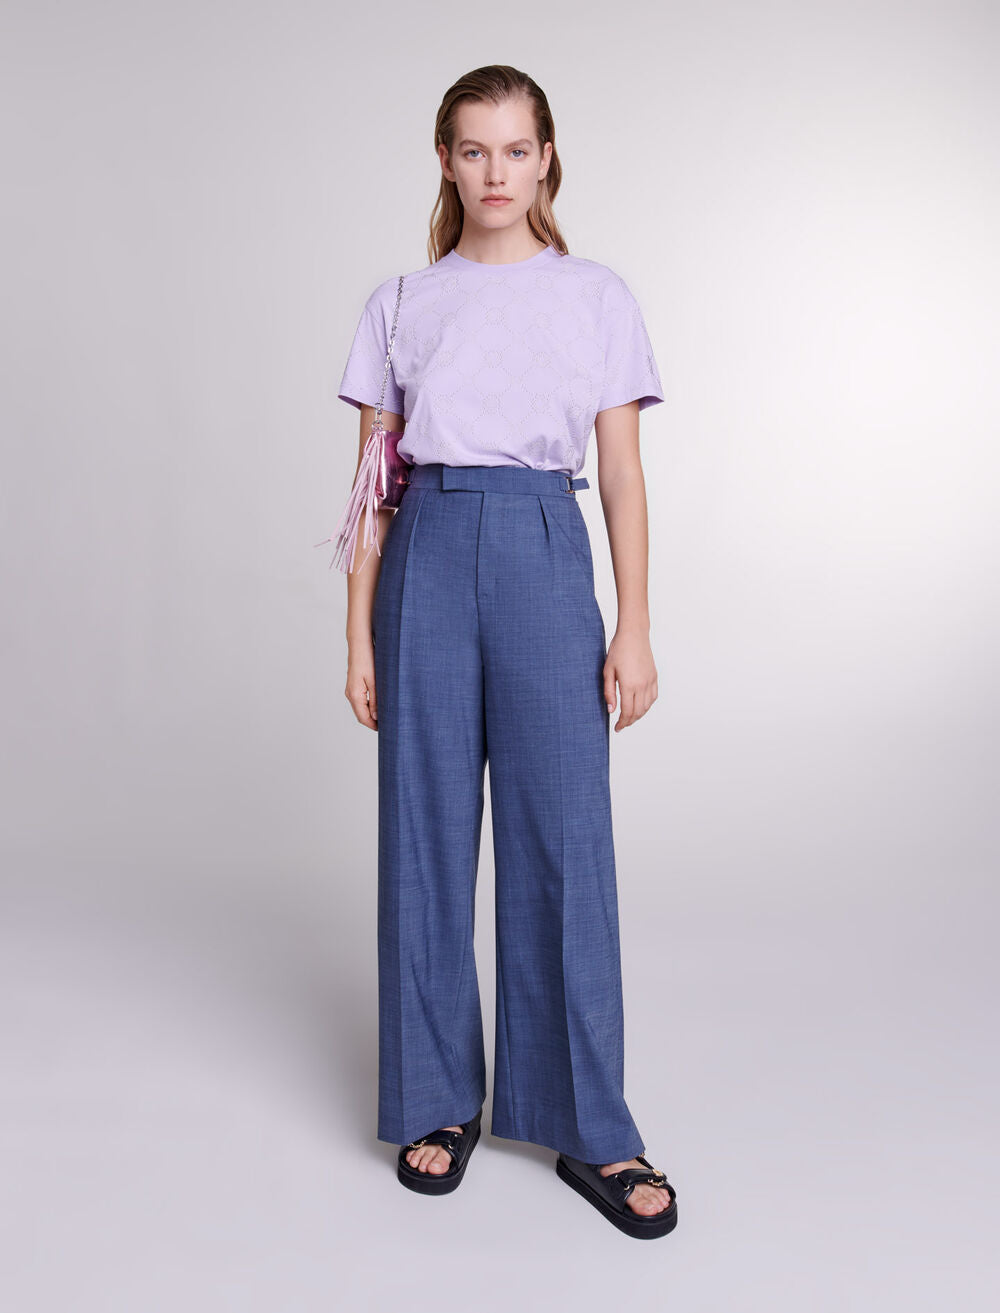 Parma Violet-featured-Studded T-shirt